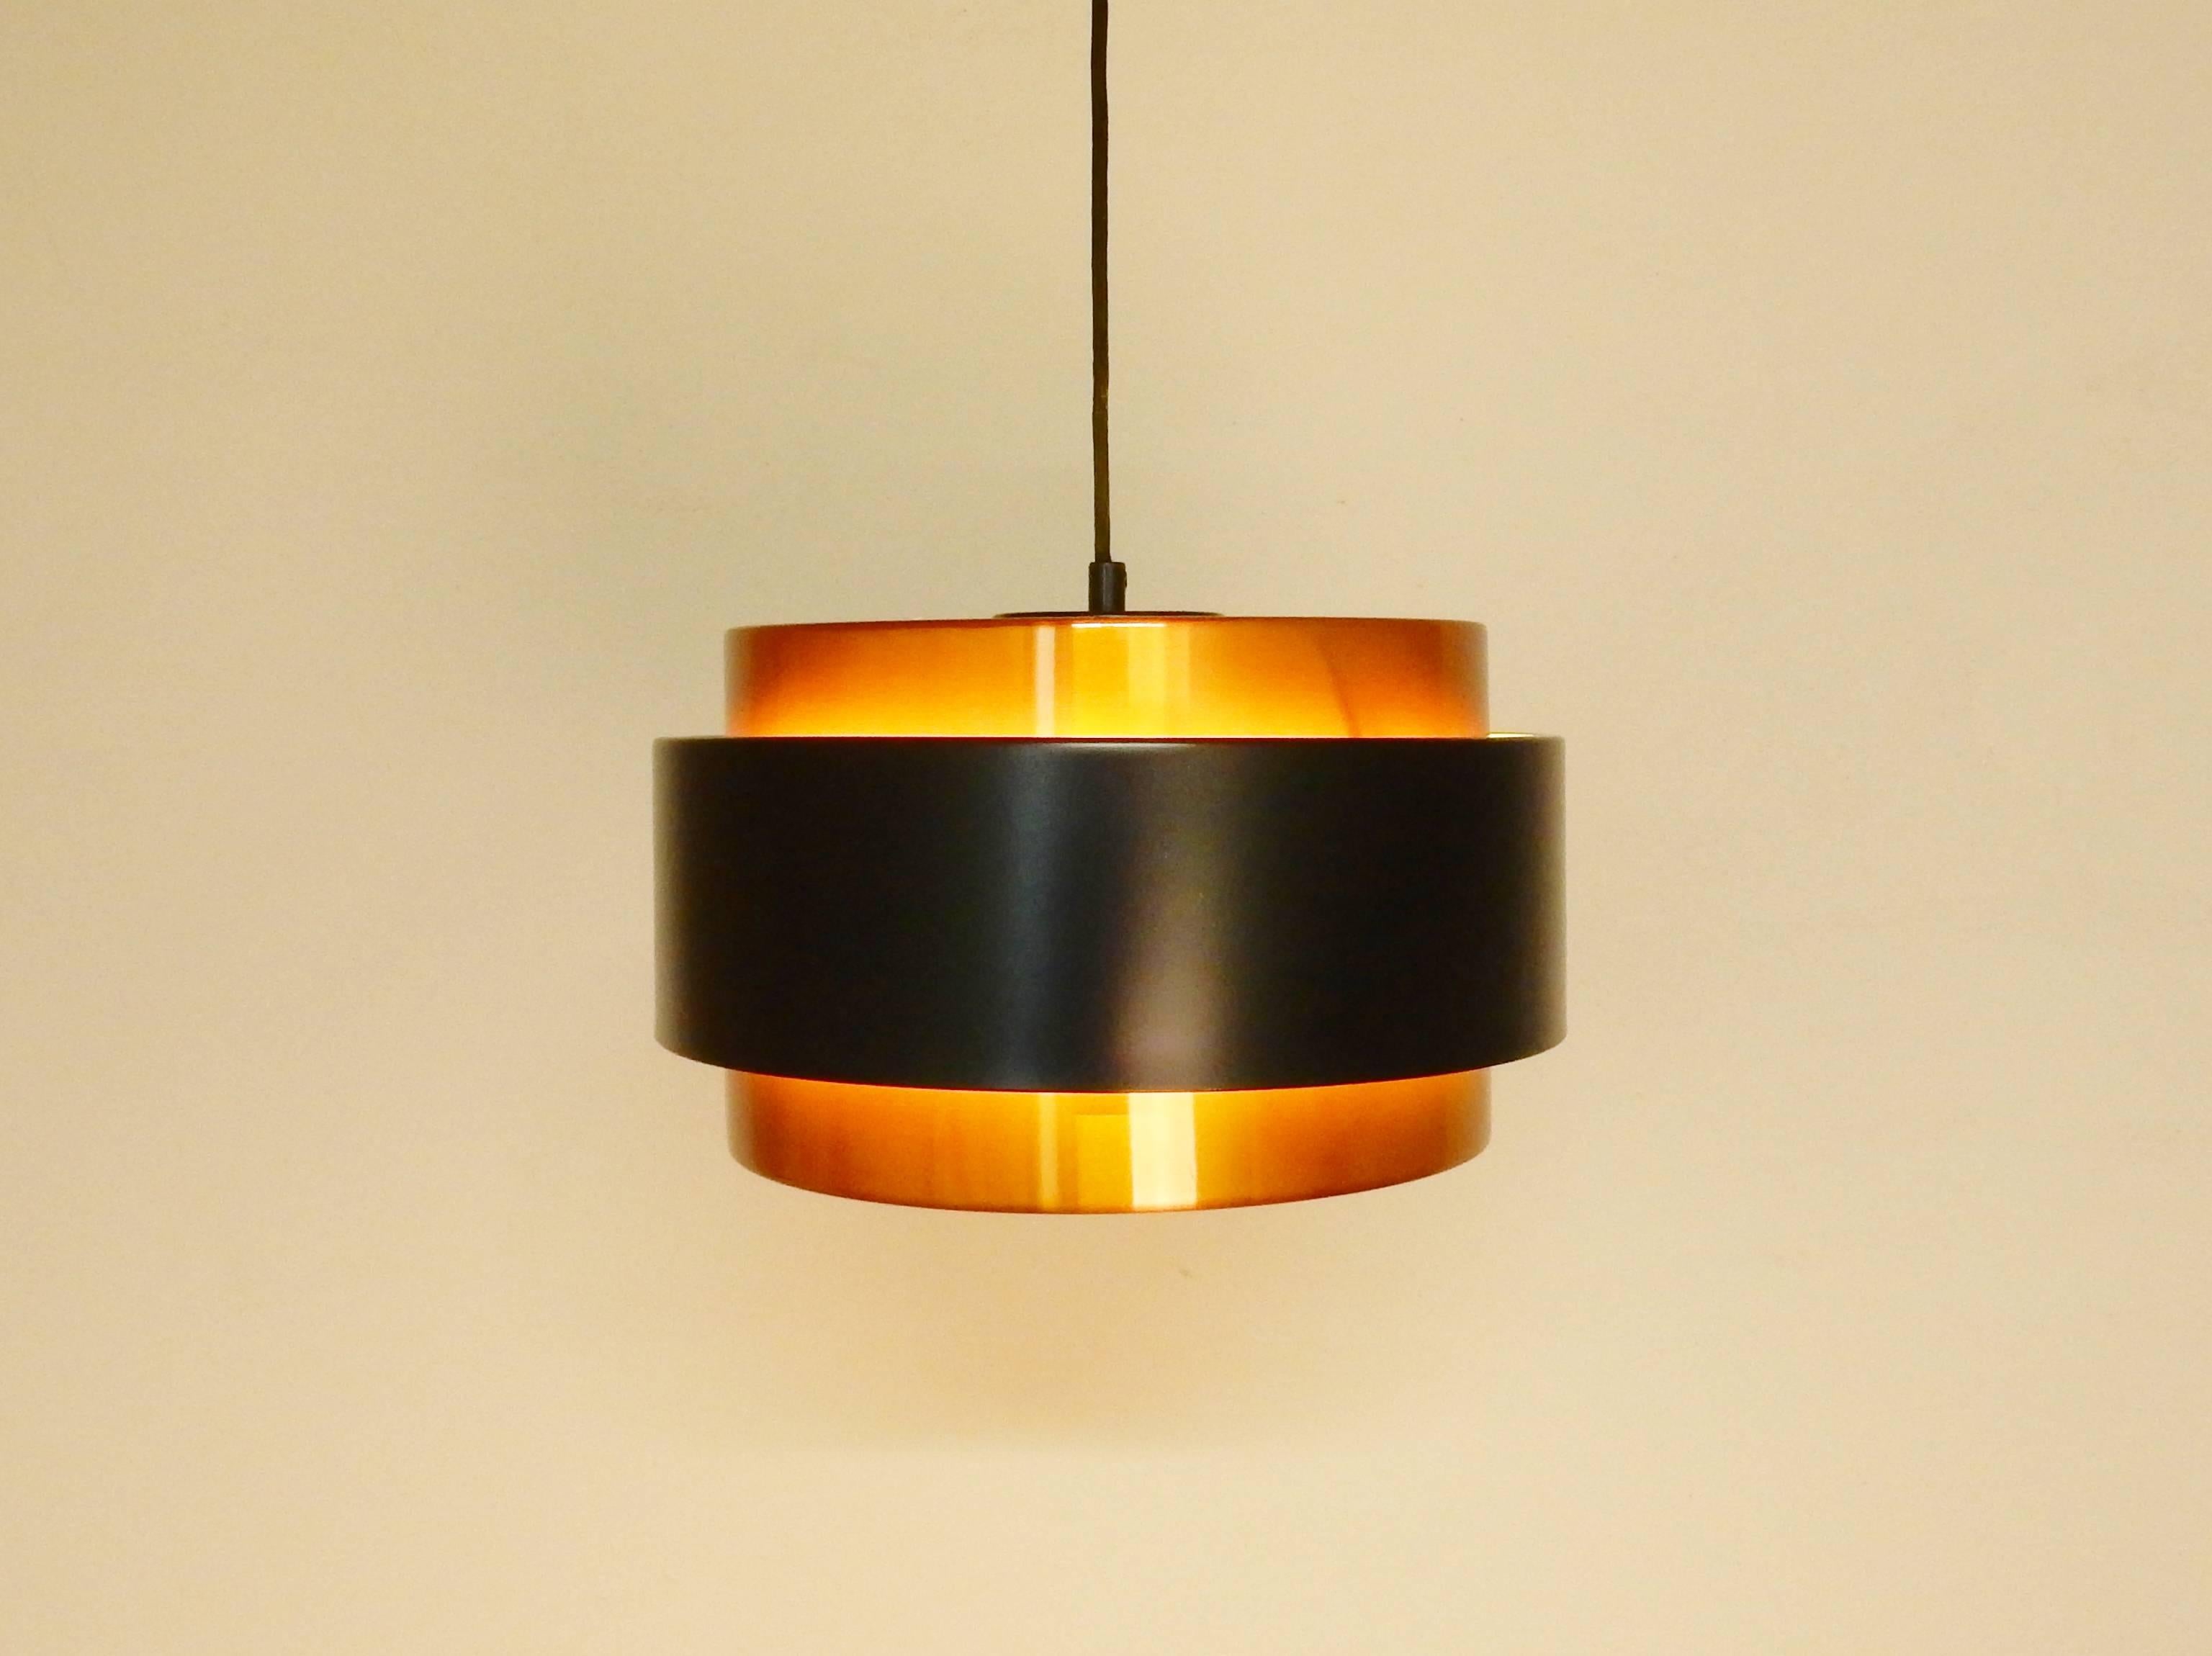 This 'Saturn' pendant holds three E27 sockets.
This light is in a very good condition with a minor thing to the black ring.

The lights of Jo Hammerborg for F&M are iconic for Danish lighting design. A very warm light due to materials and color.